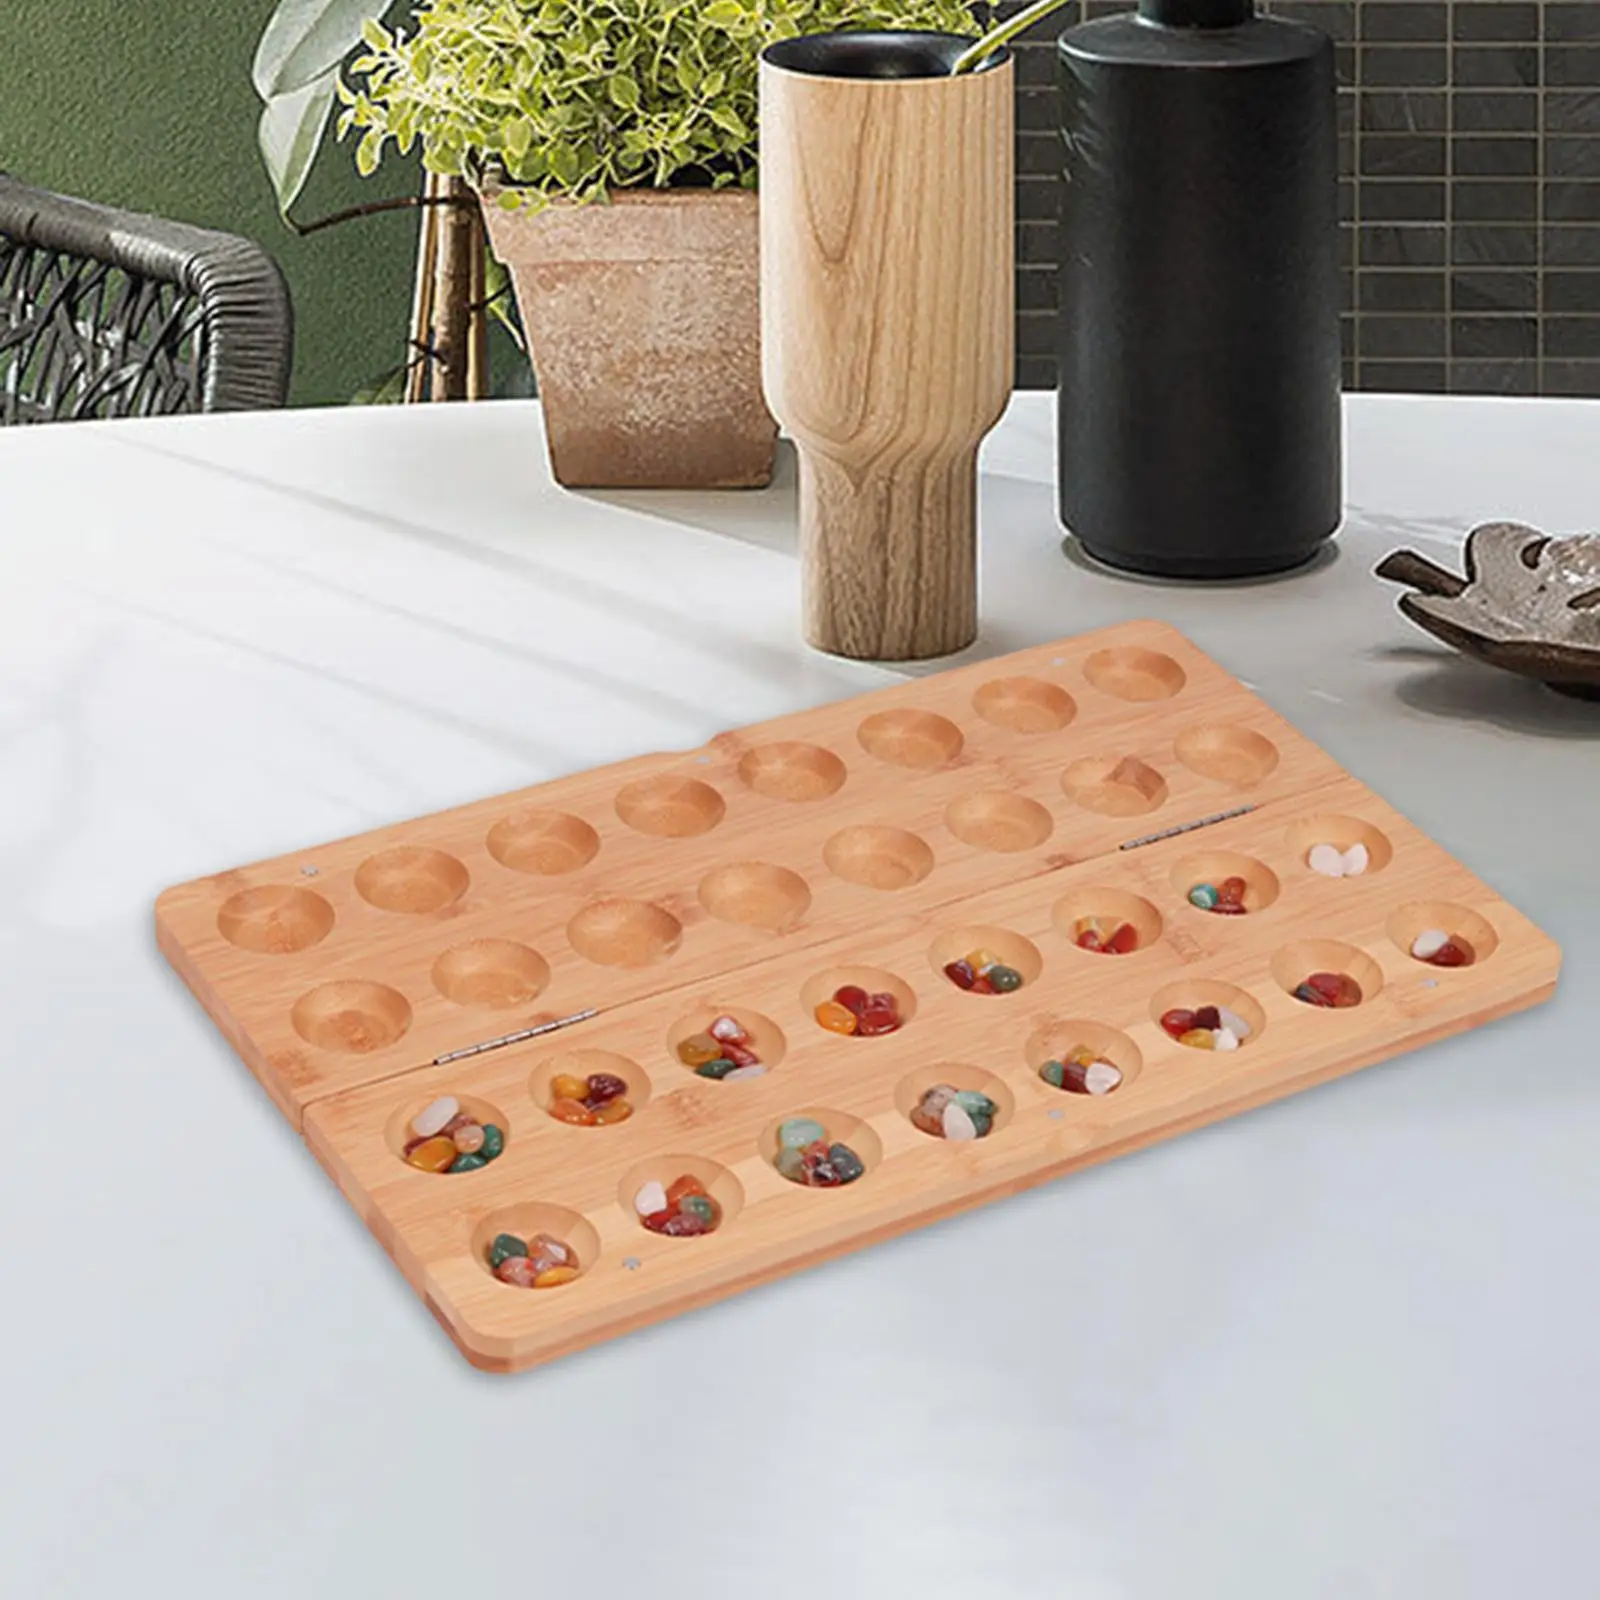 Mancala Board Games Party Favors Entertainment for Family Game Night Christmas Gift 65 Colored Stones Ancient Strategy Game